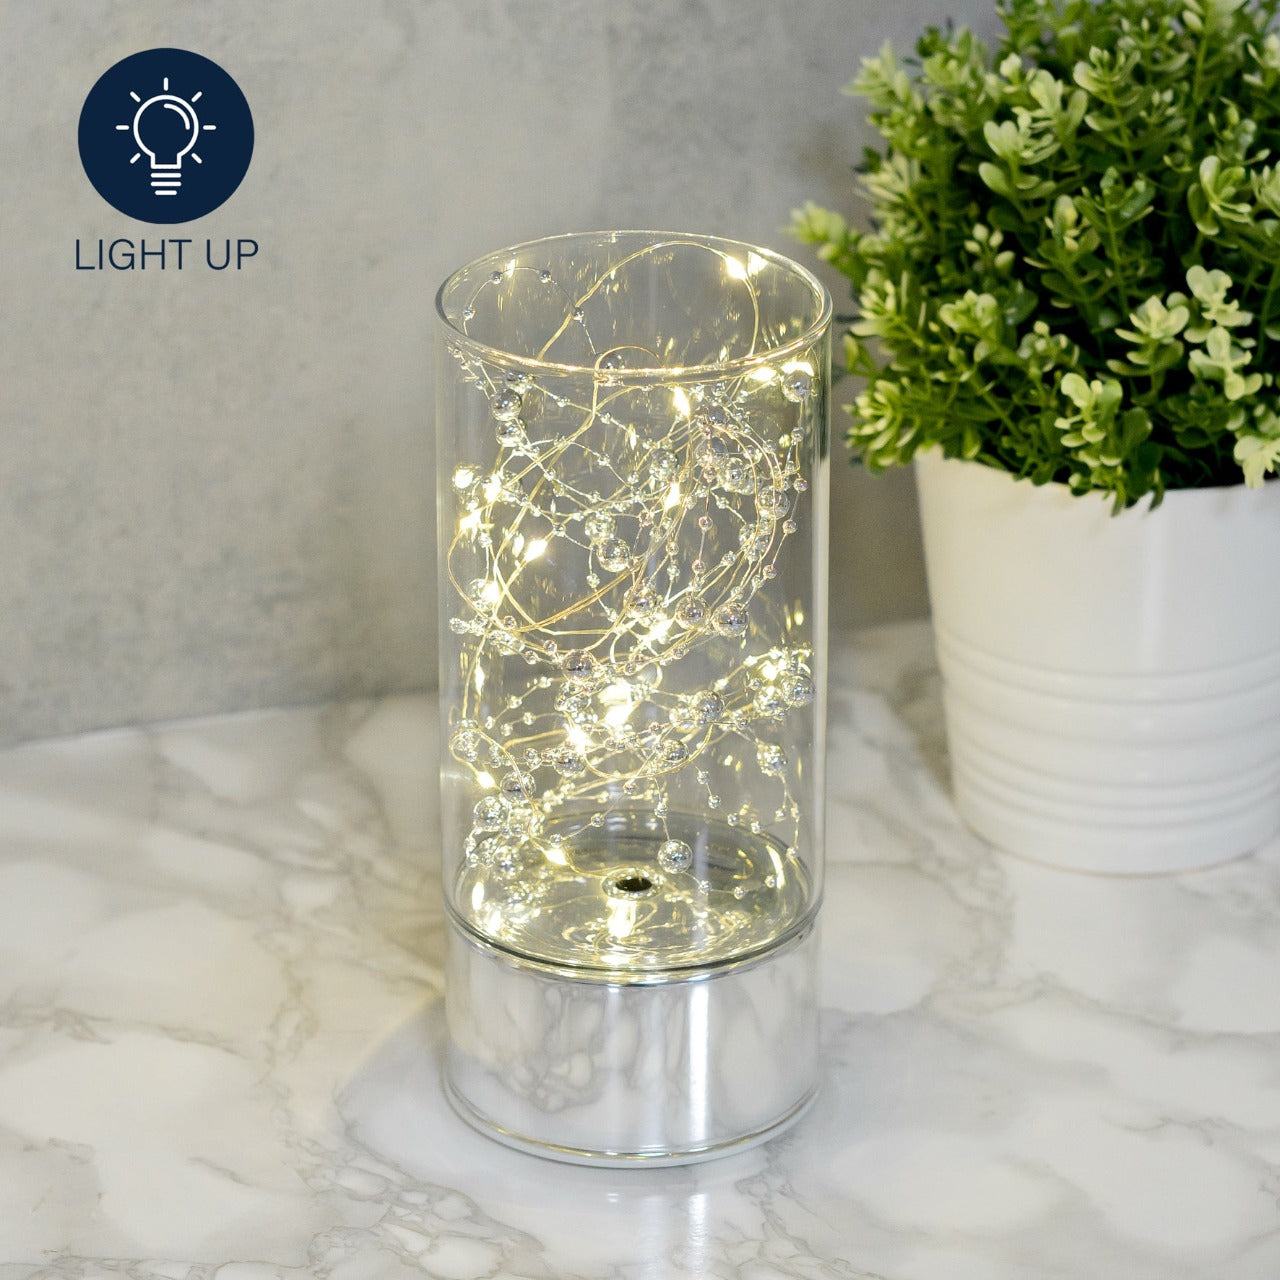 LED Tube Light 20cm Tall  Bring some contemporary shimmer to your home with this elegant silver glass light tube. From the Silver Luxe collection by HESTIA® - unparalleled glamour, style and elegance in contemporary home and gift.